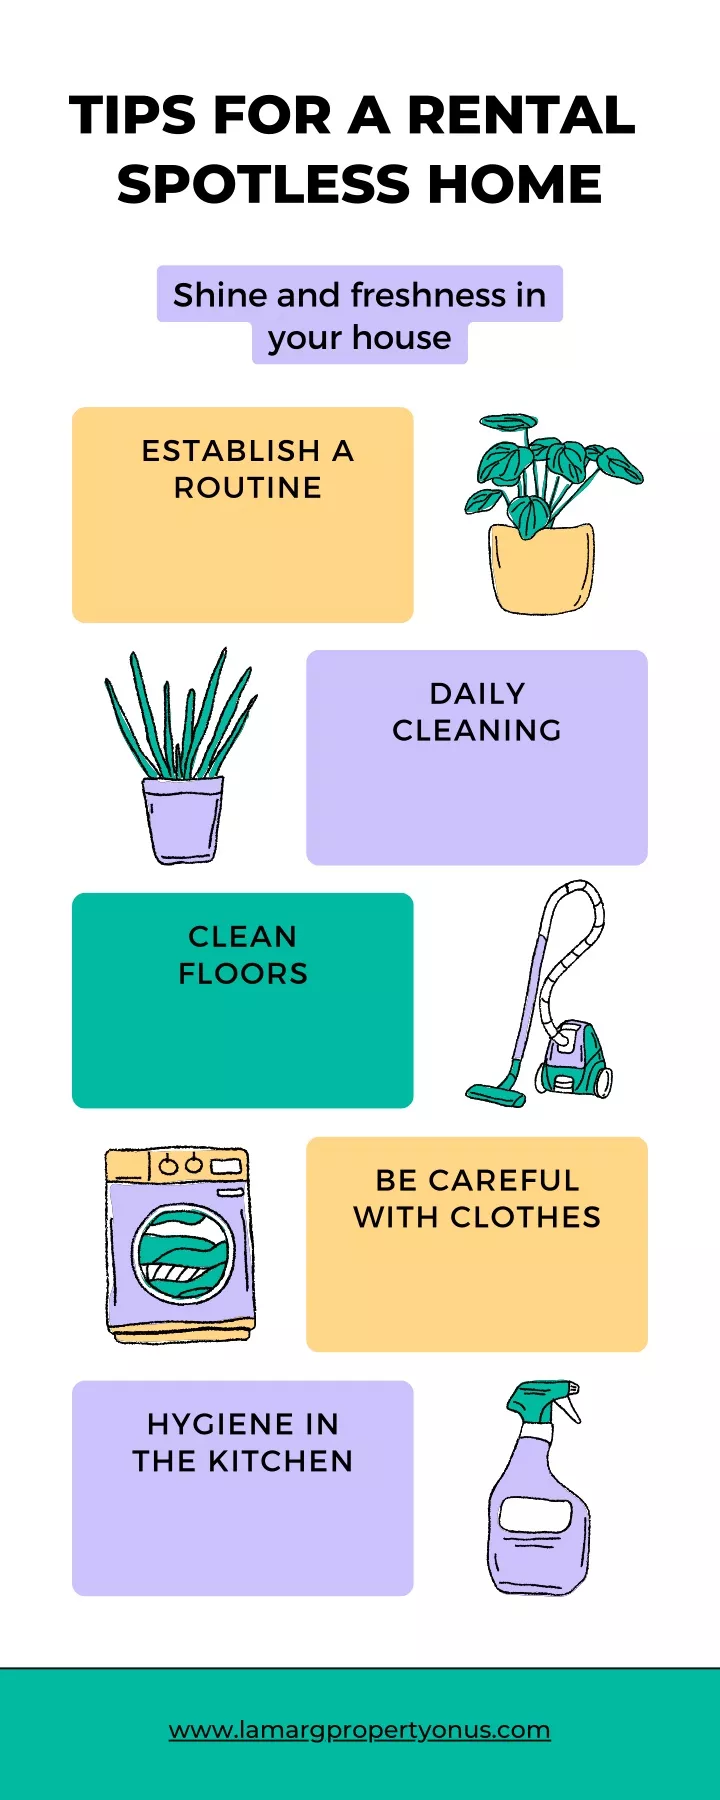 tips for a rental spotless home